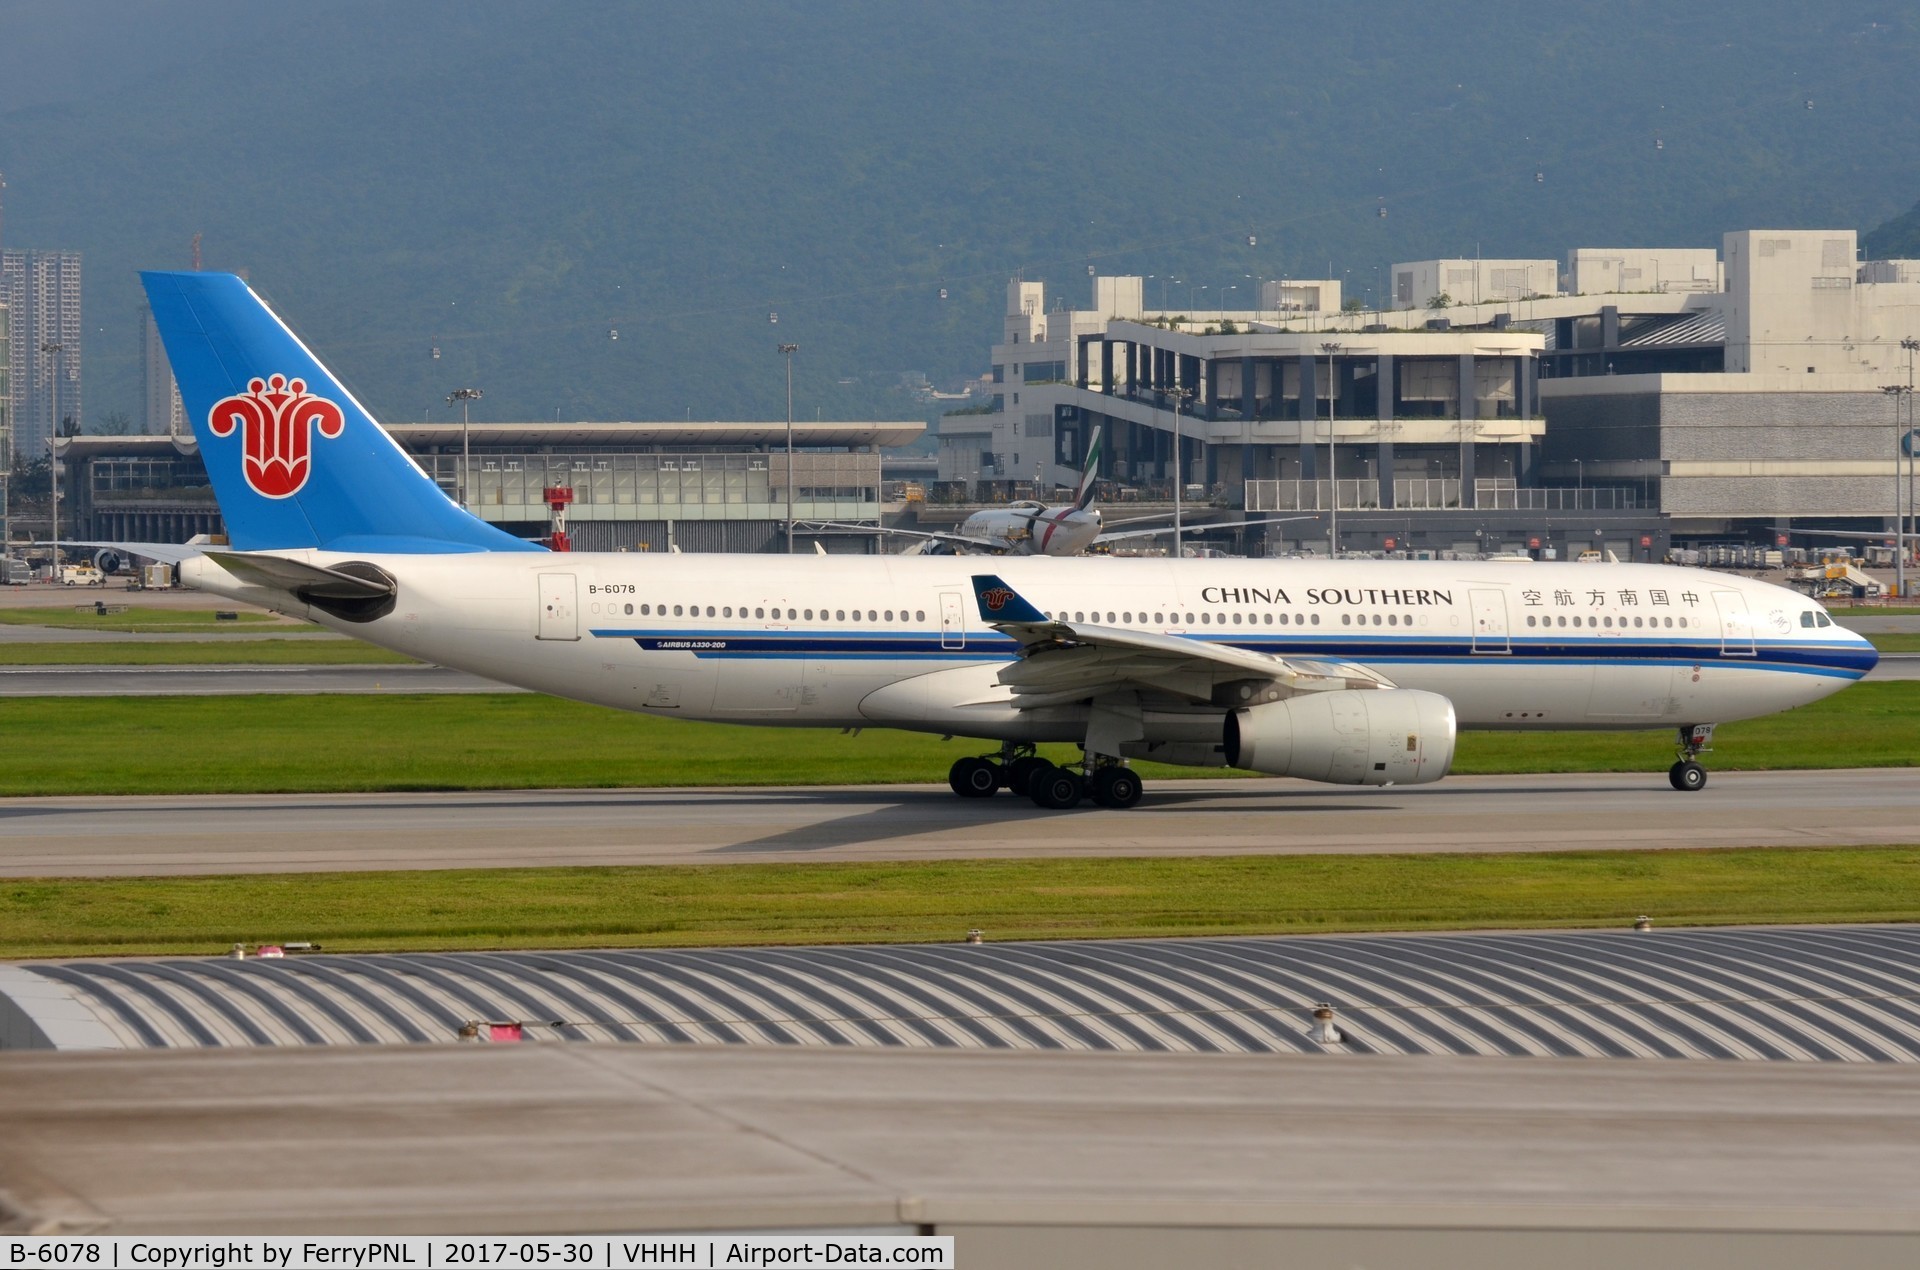 B-6078, 2007 Airbus A330-243 C/N 840, China Southern A332 taxying for departure.